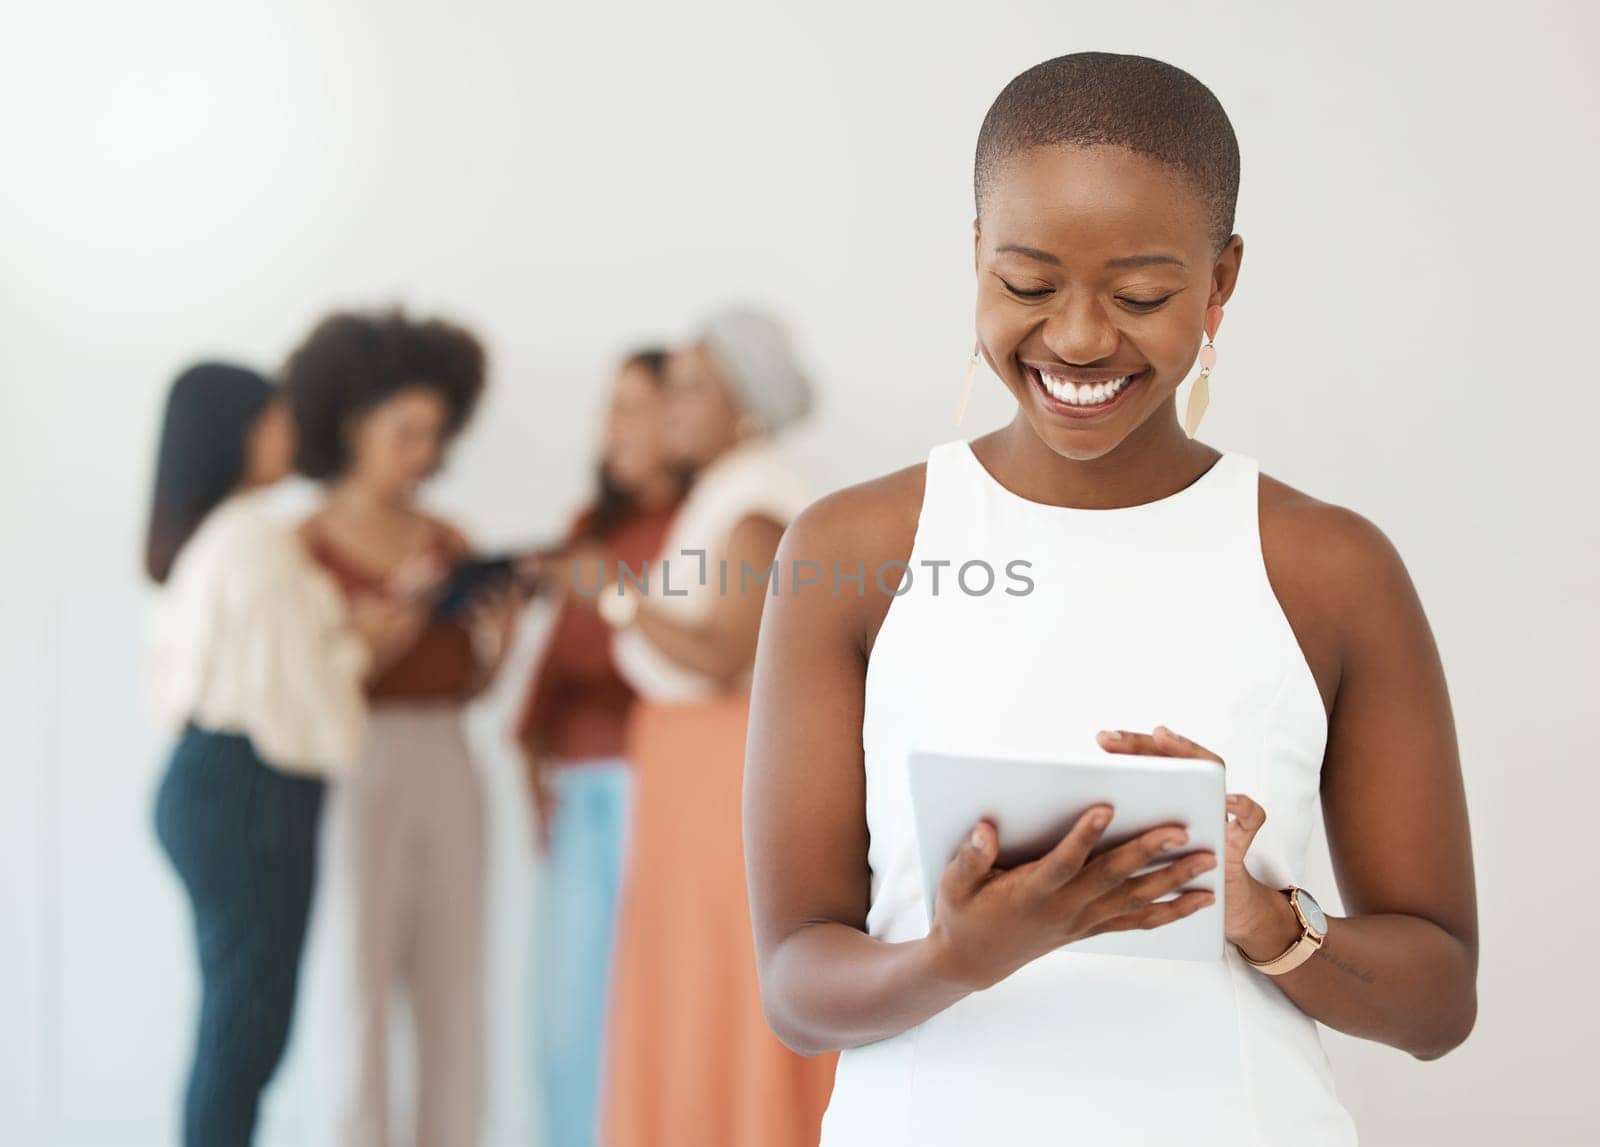 Black woman, tablet and business smile for communication, internet and network connection. Female leader on mobile app for social media, leadership report and search or typing and reading email.